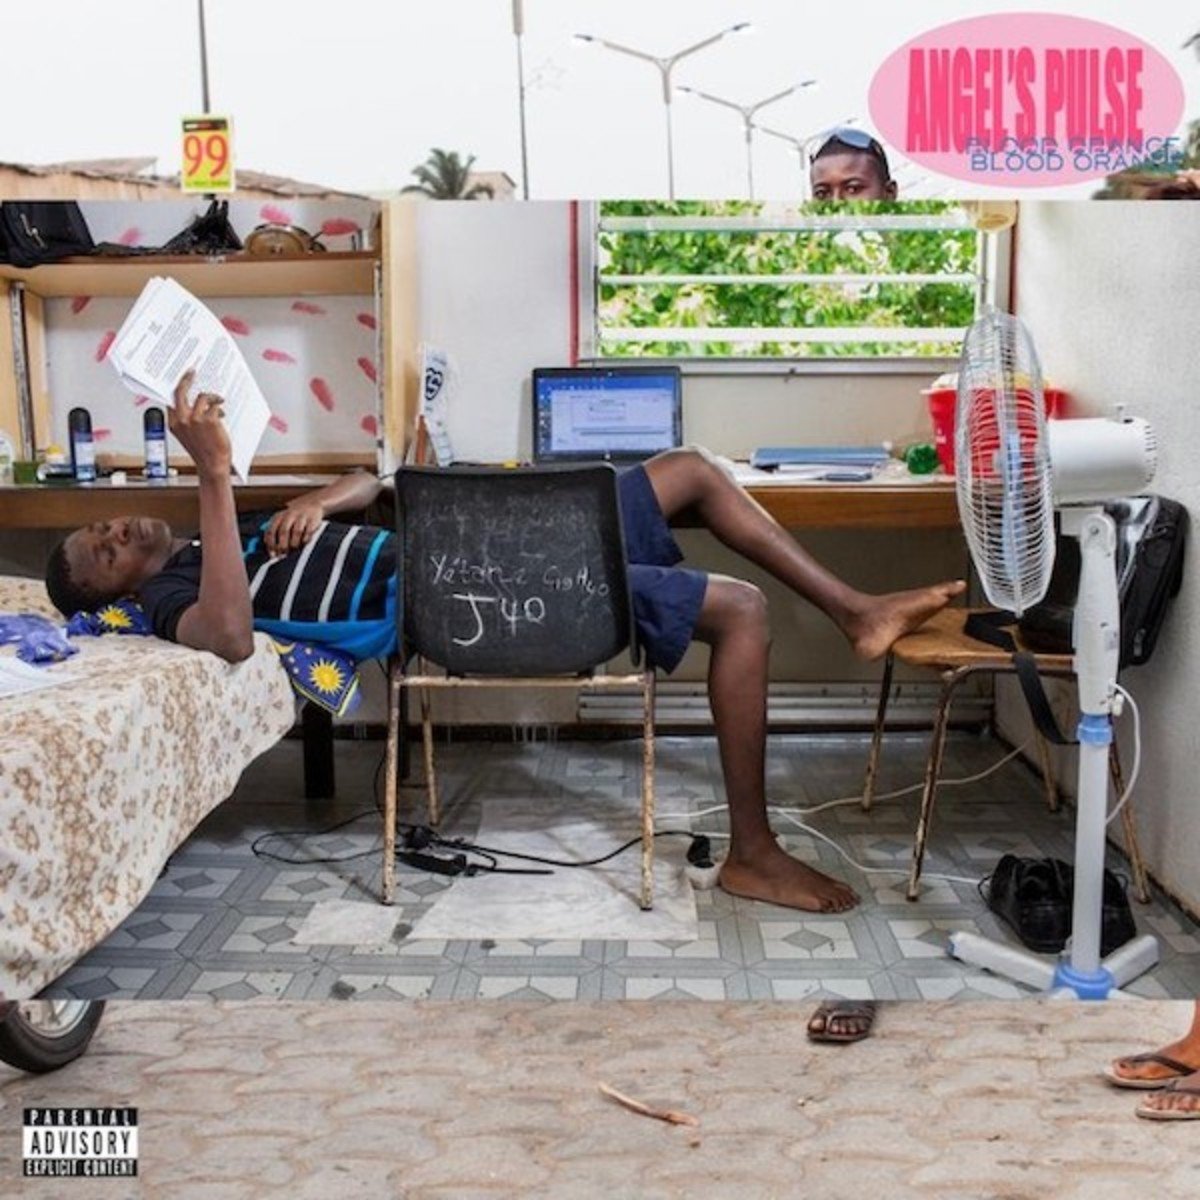 Blood Orange Gives The Meaningless A New Glow On ‘Angel’s Pulse’